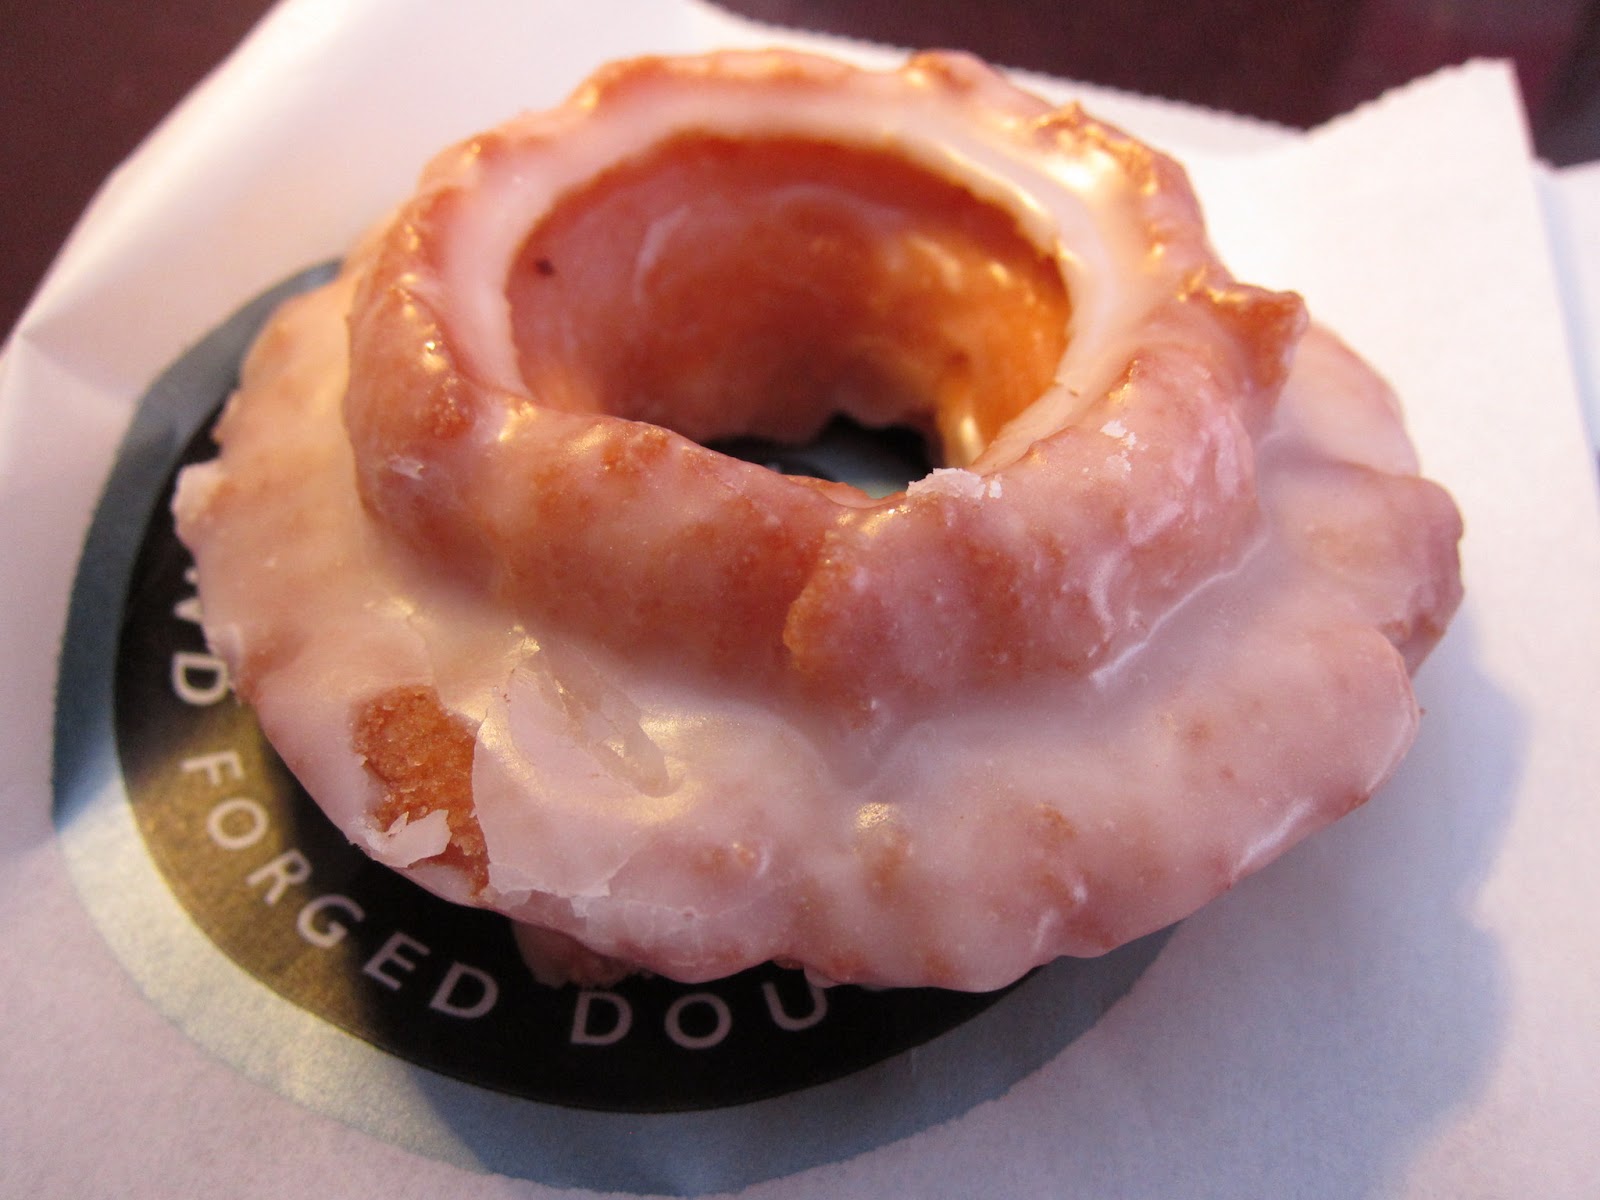 Overworked. Underfed.: Top Pot Doughnuts